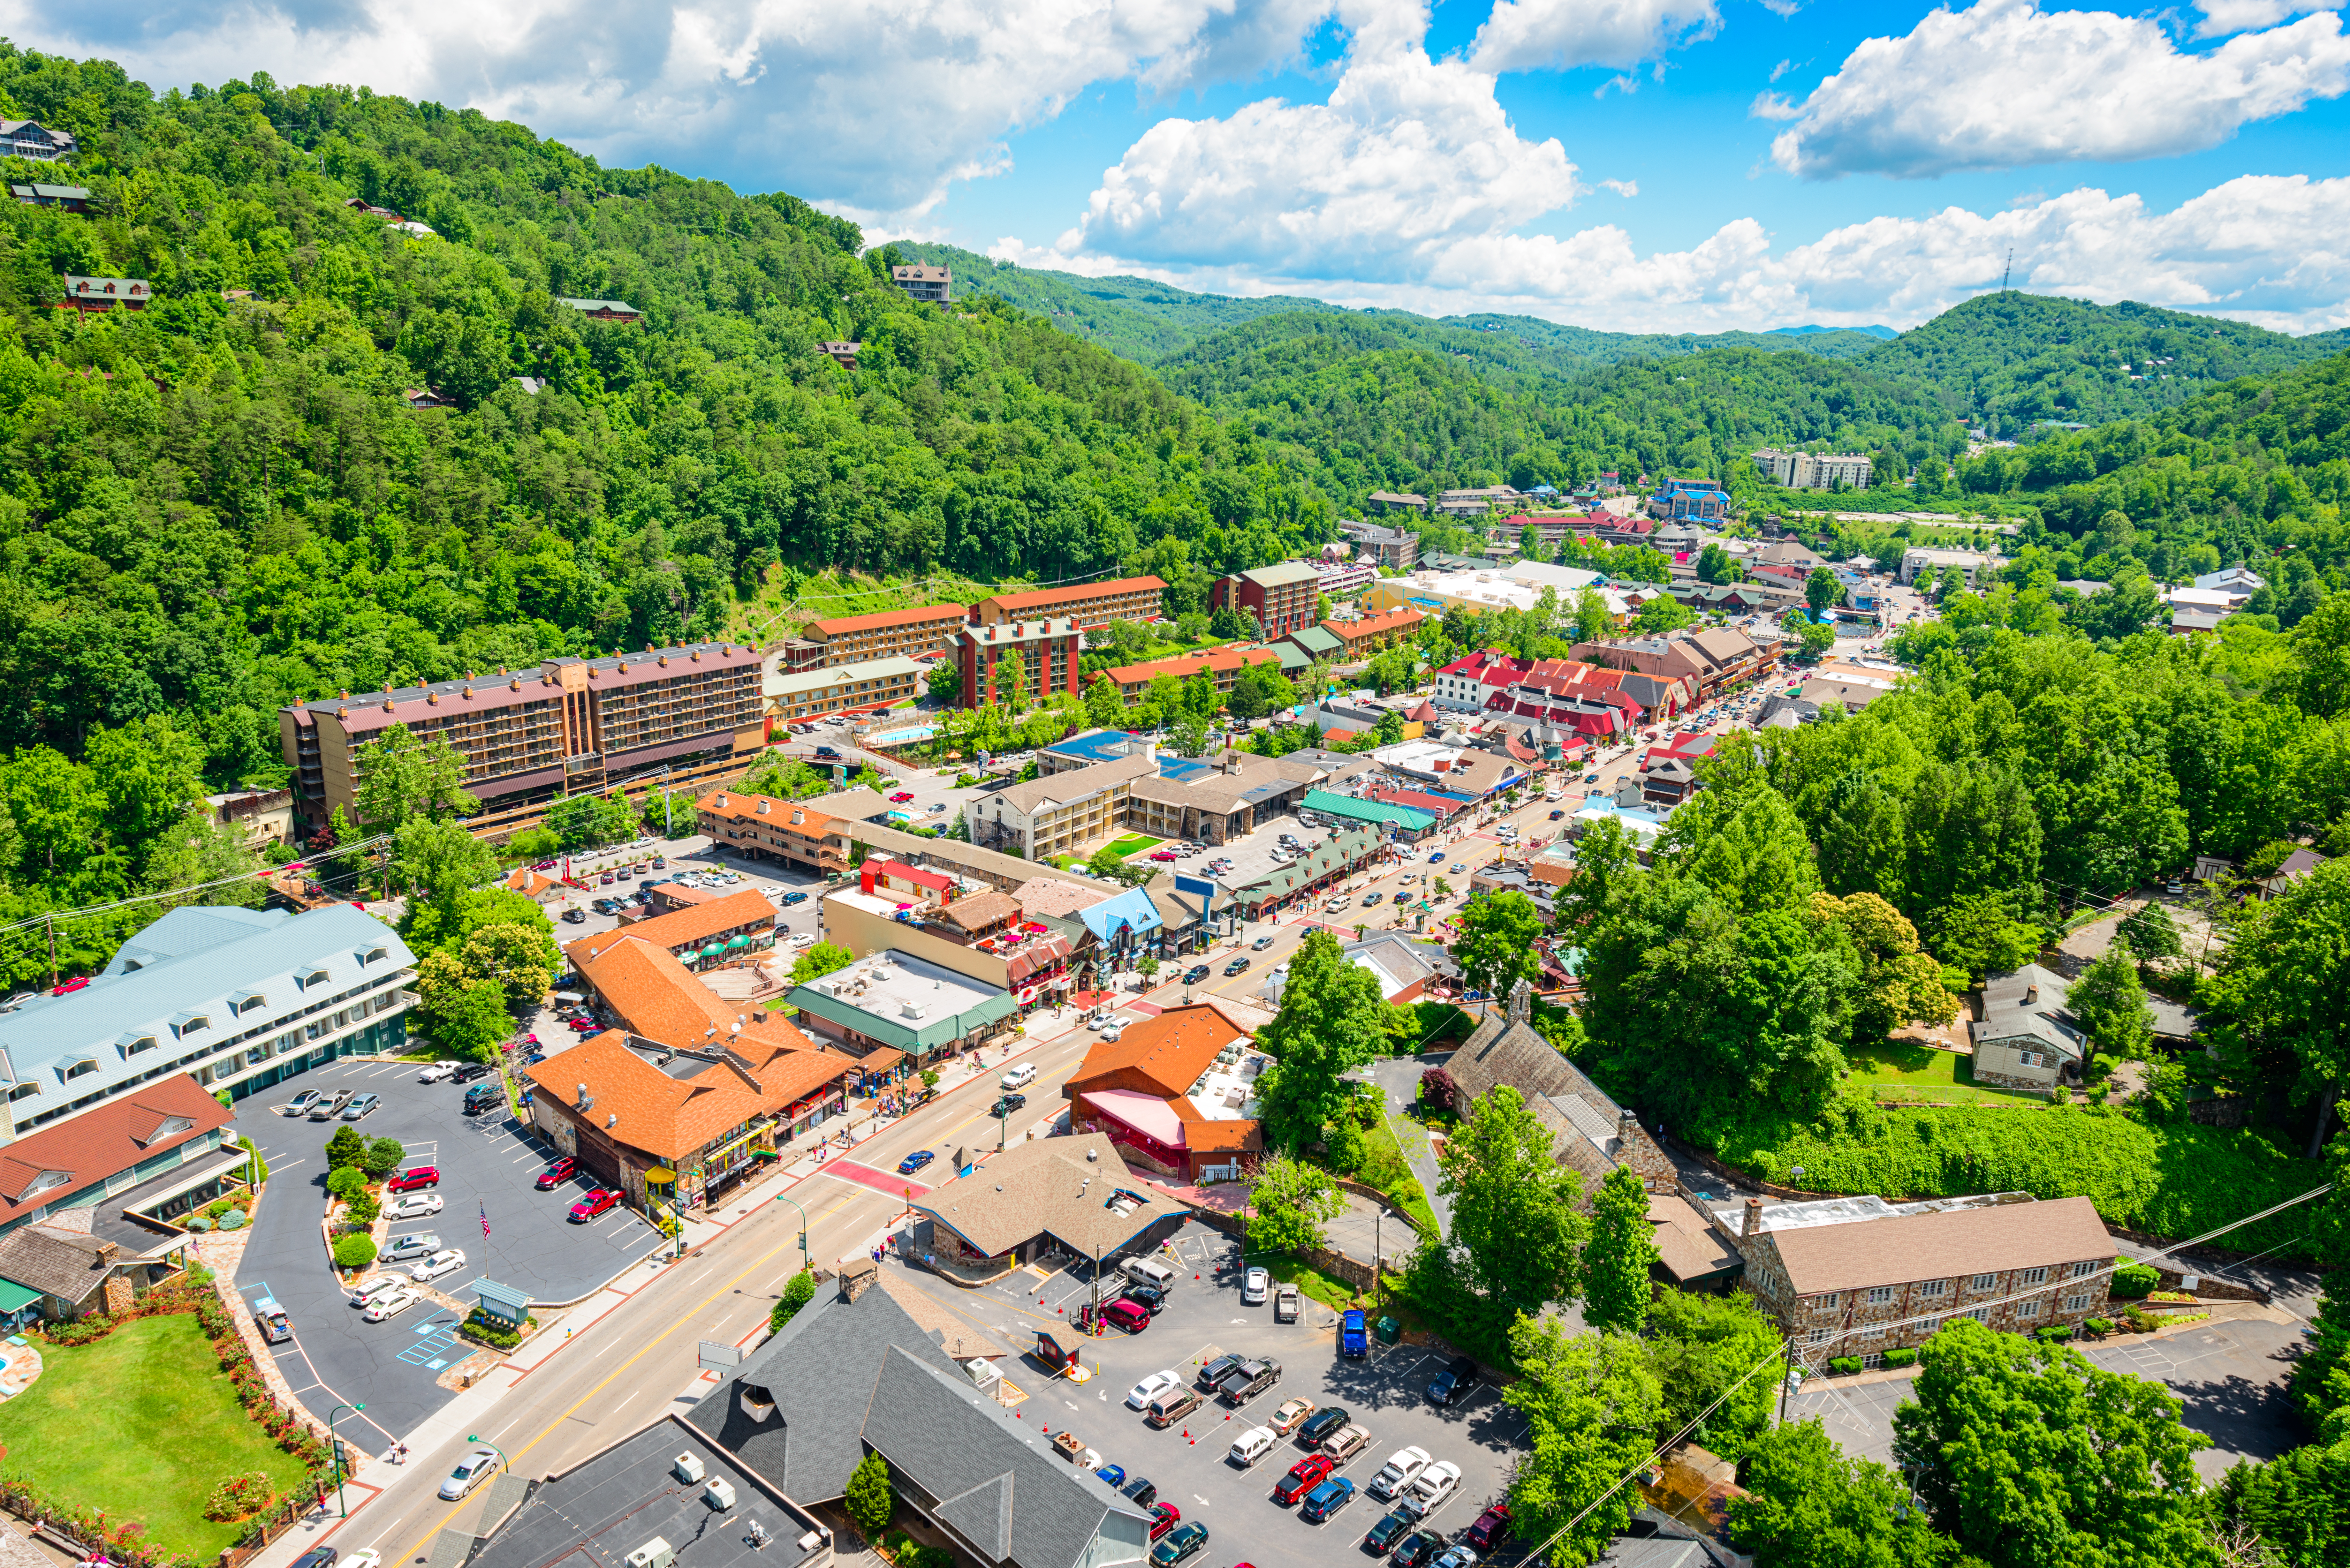 Gatlinburg, Tennessee: One of the Best Family Vacation Spots